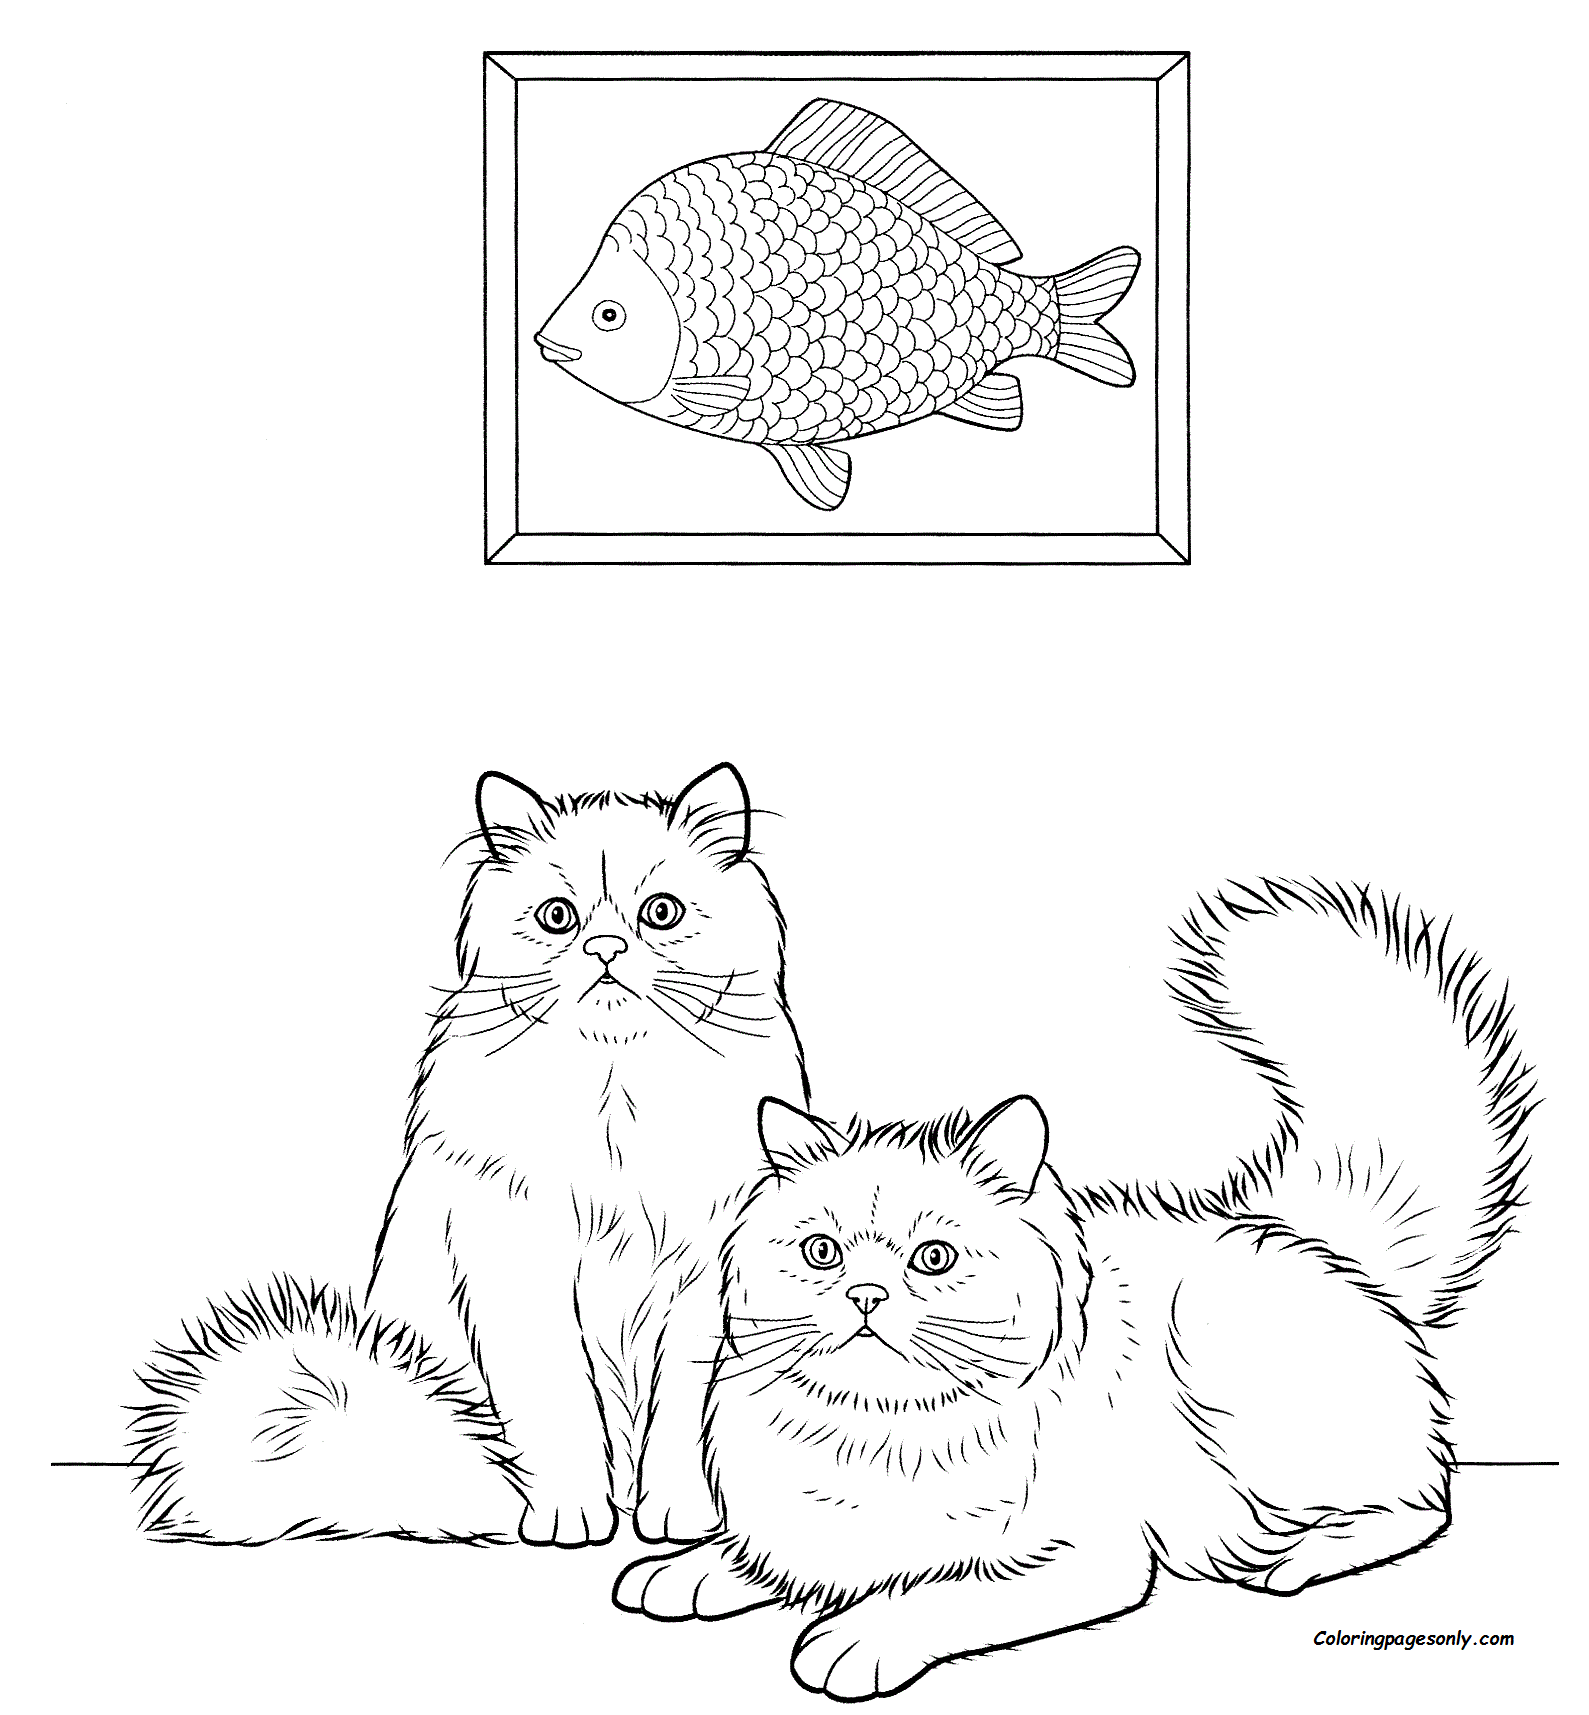 Cute Cats coloring page Coloring Page - Free Coloring Pages Online